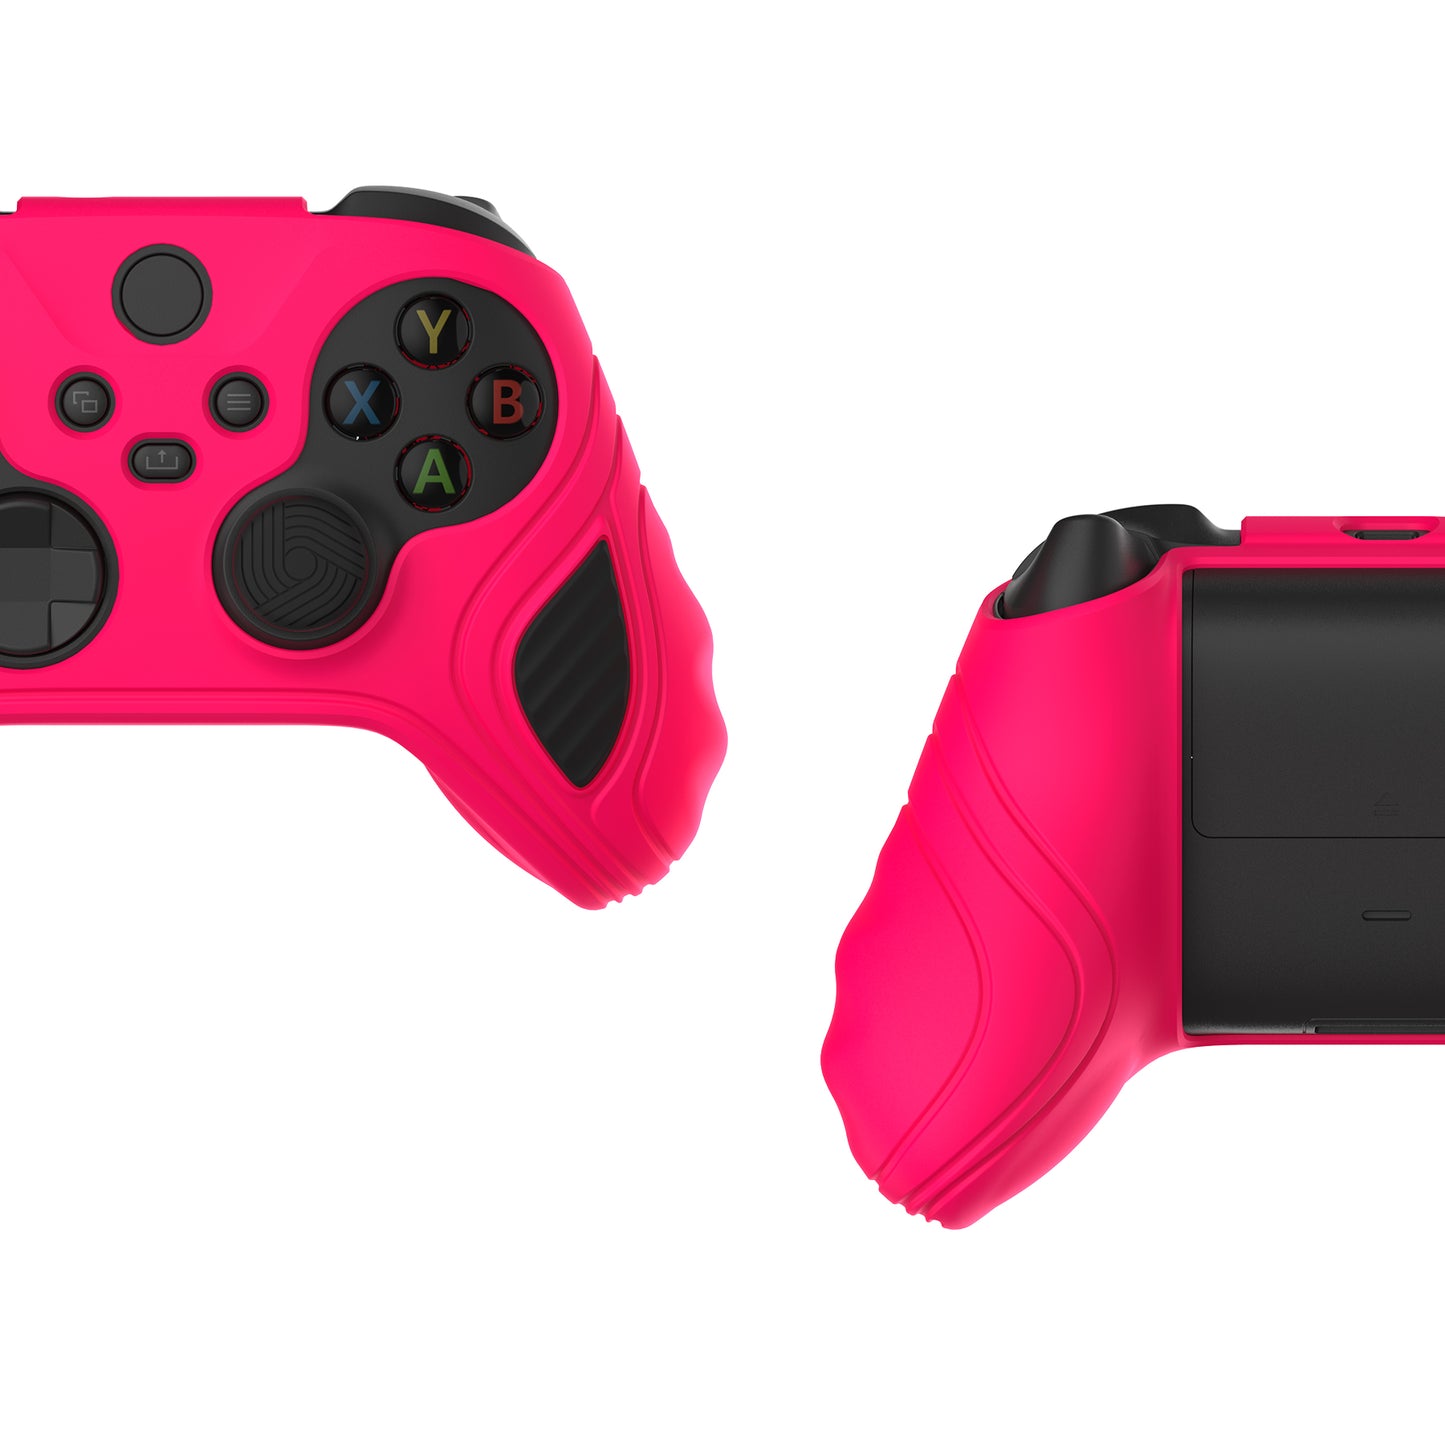 PlayVital Scorpion Edition Two-Tone Anti-Slip Silicone Case Cover for Xbox Series X/S Controller, Soft Rubber Case for Xbox Core Controller with Thumb Grip Caps - Bright Pink & Black - SPX3007 PlayVital